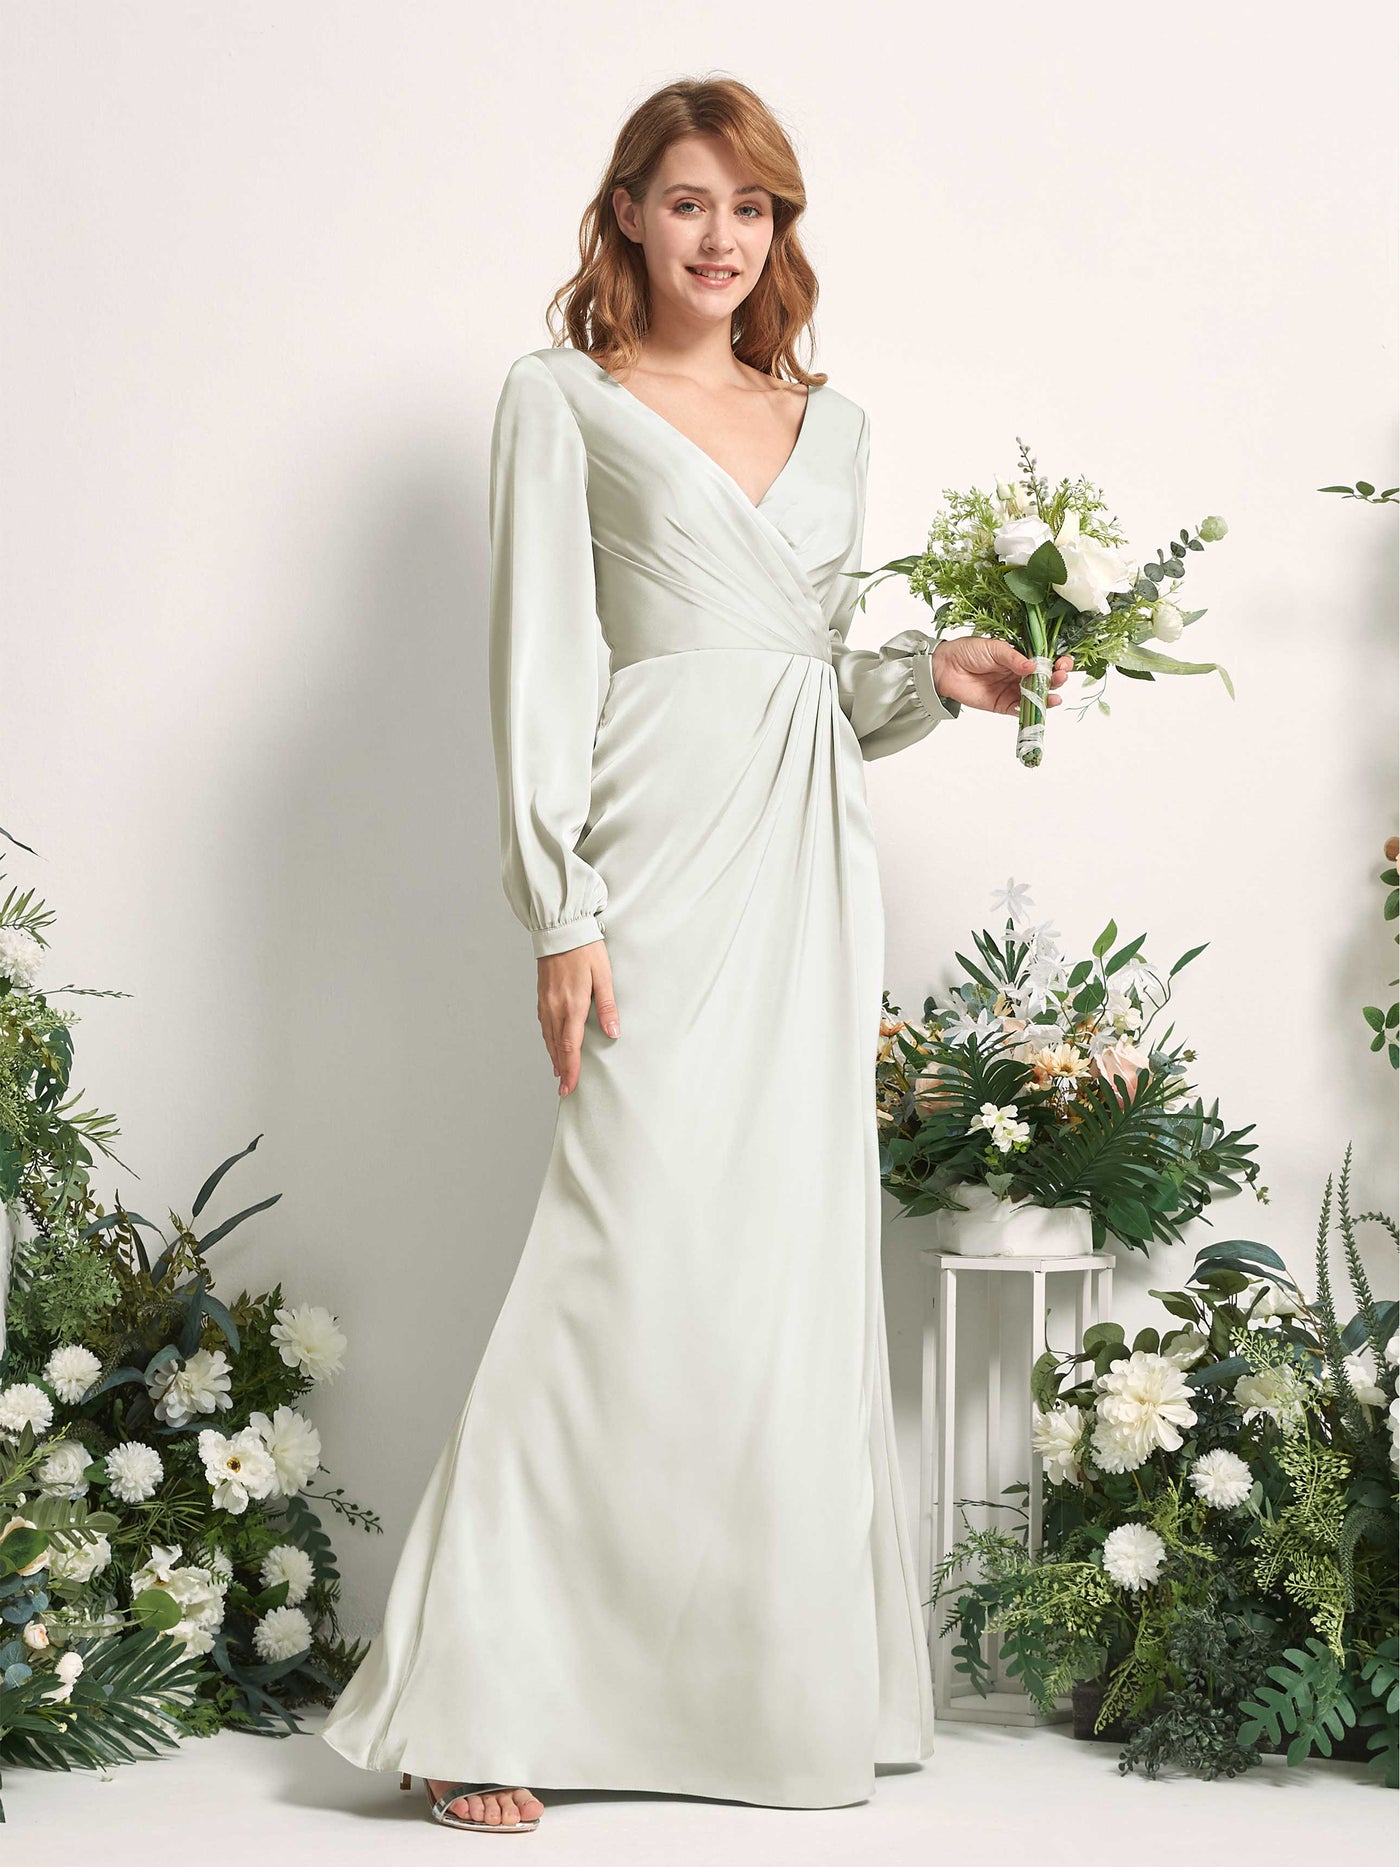 Ivory Bridesmaid Dresses Bridesmaid Dress Ball Gown Satin V-neck Full Length Long Sleeves Wedding Party Dress (80225176)#color_ivory